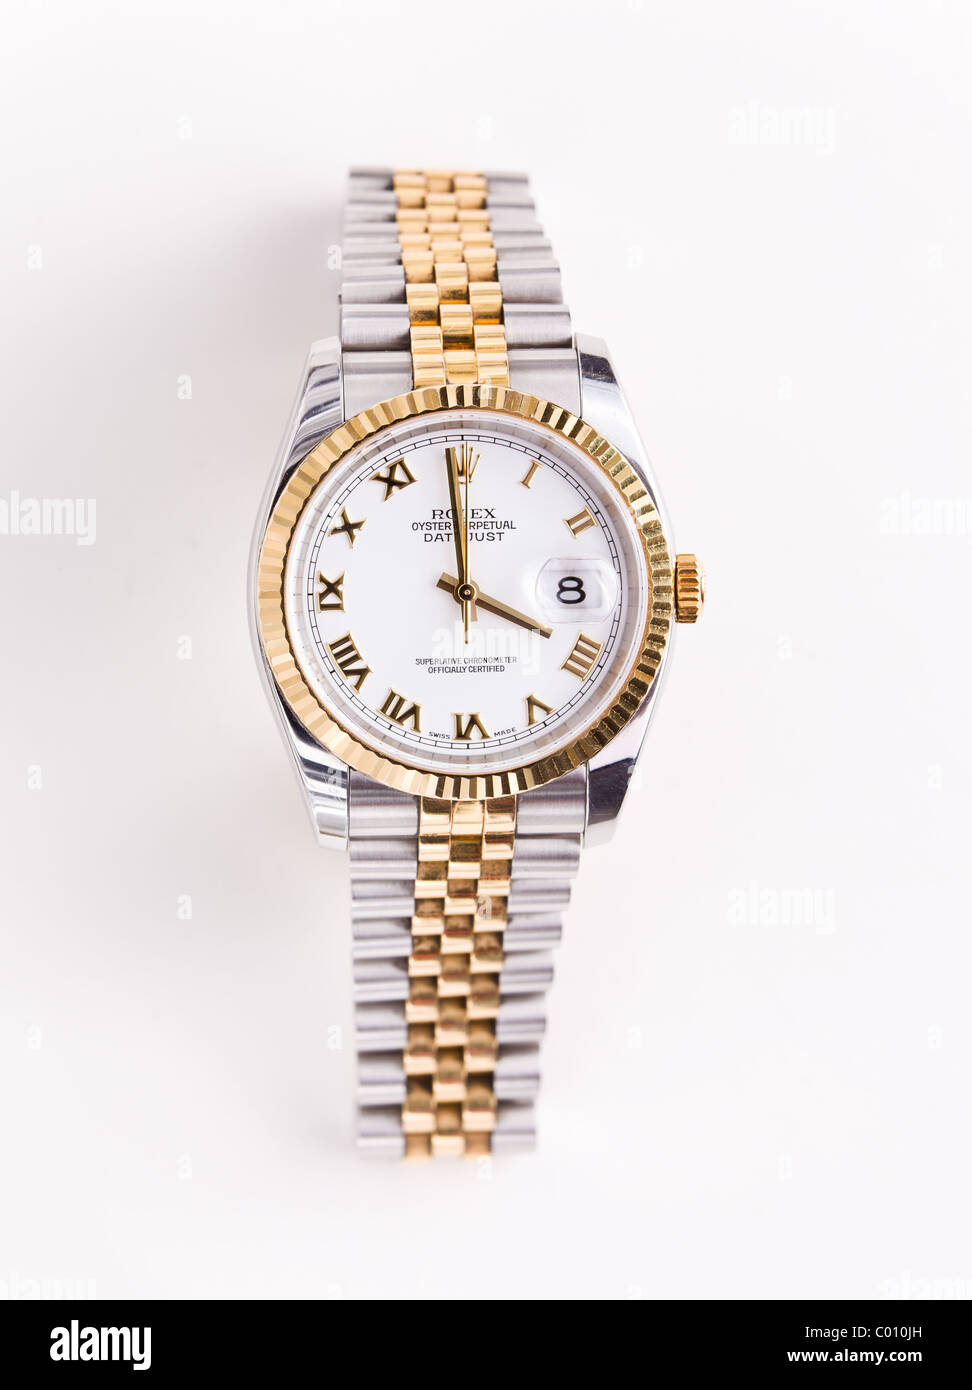 Expensive gold beveled Rolex watch with white face and gold hands and numerals against white background Stock Photo